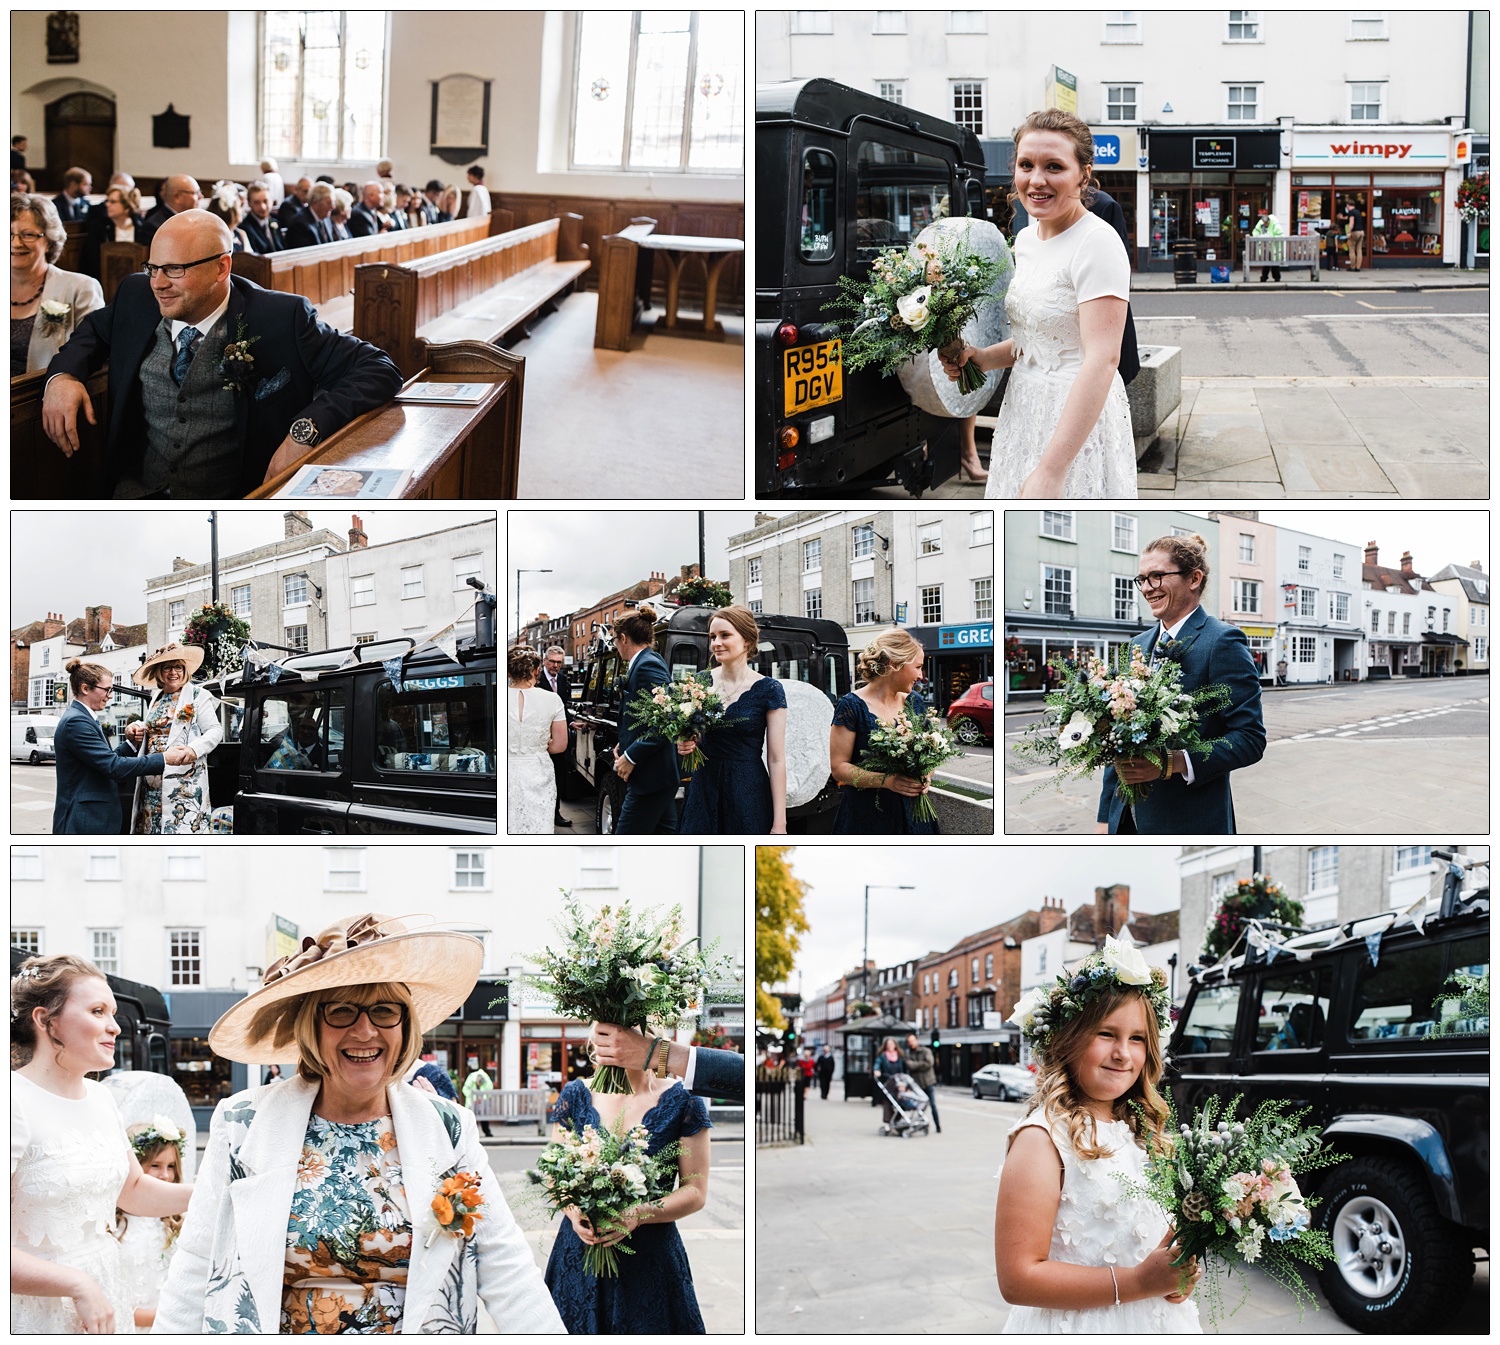 The bride and bridesmaids arriving at Maldon church for wedding in a Land Rover.